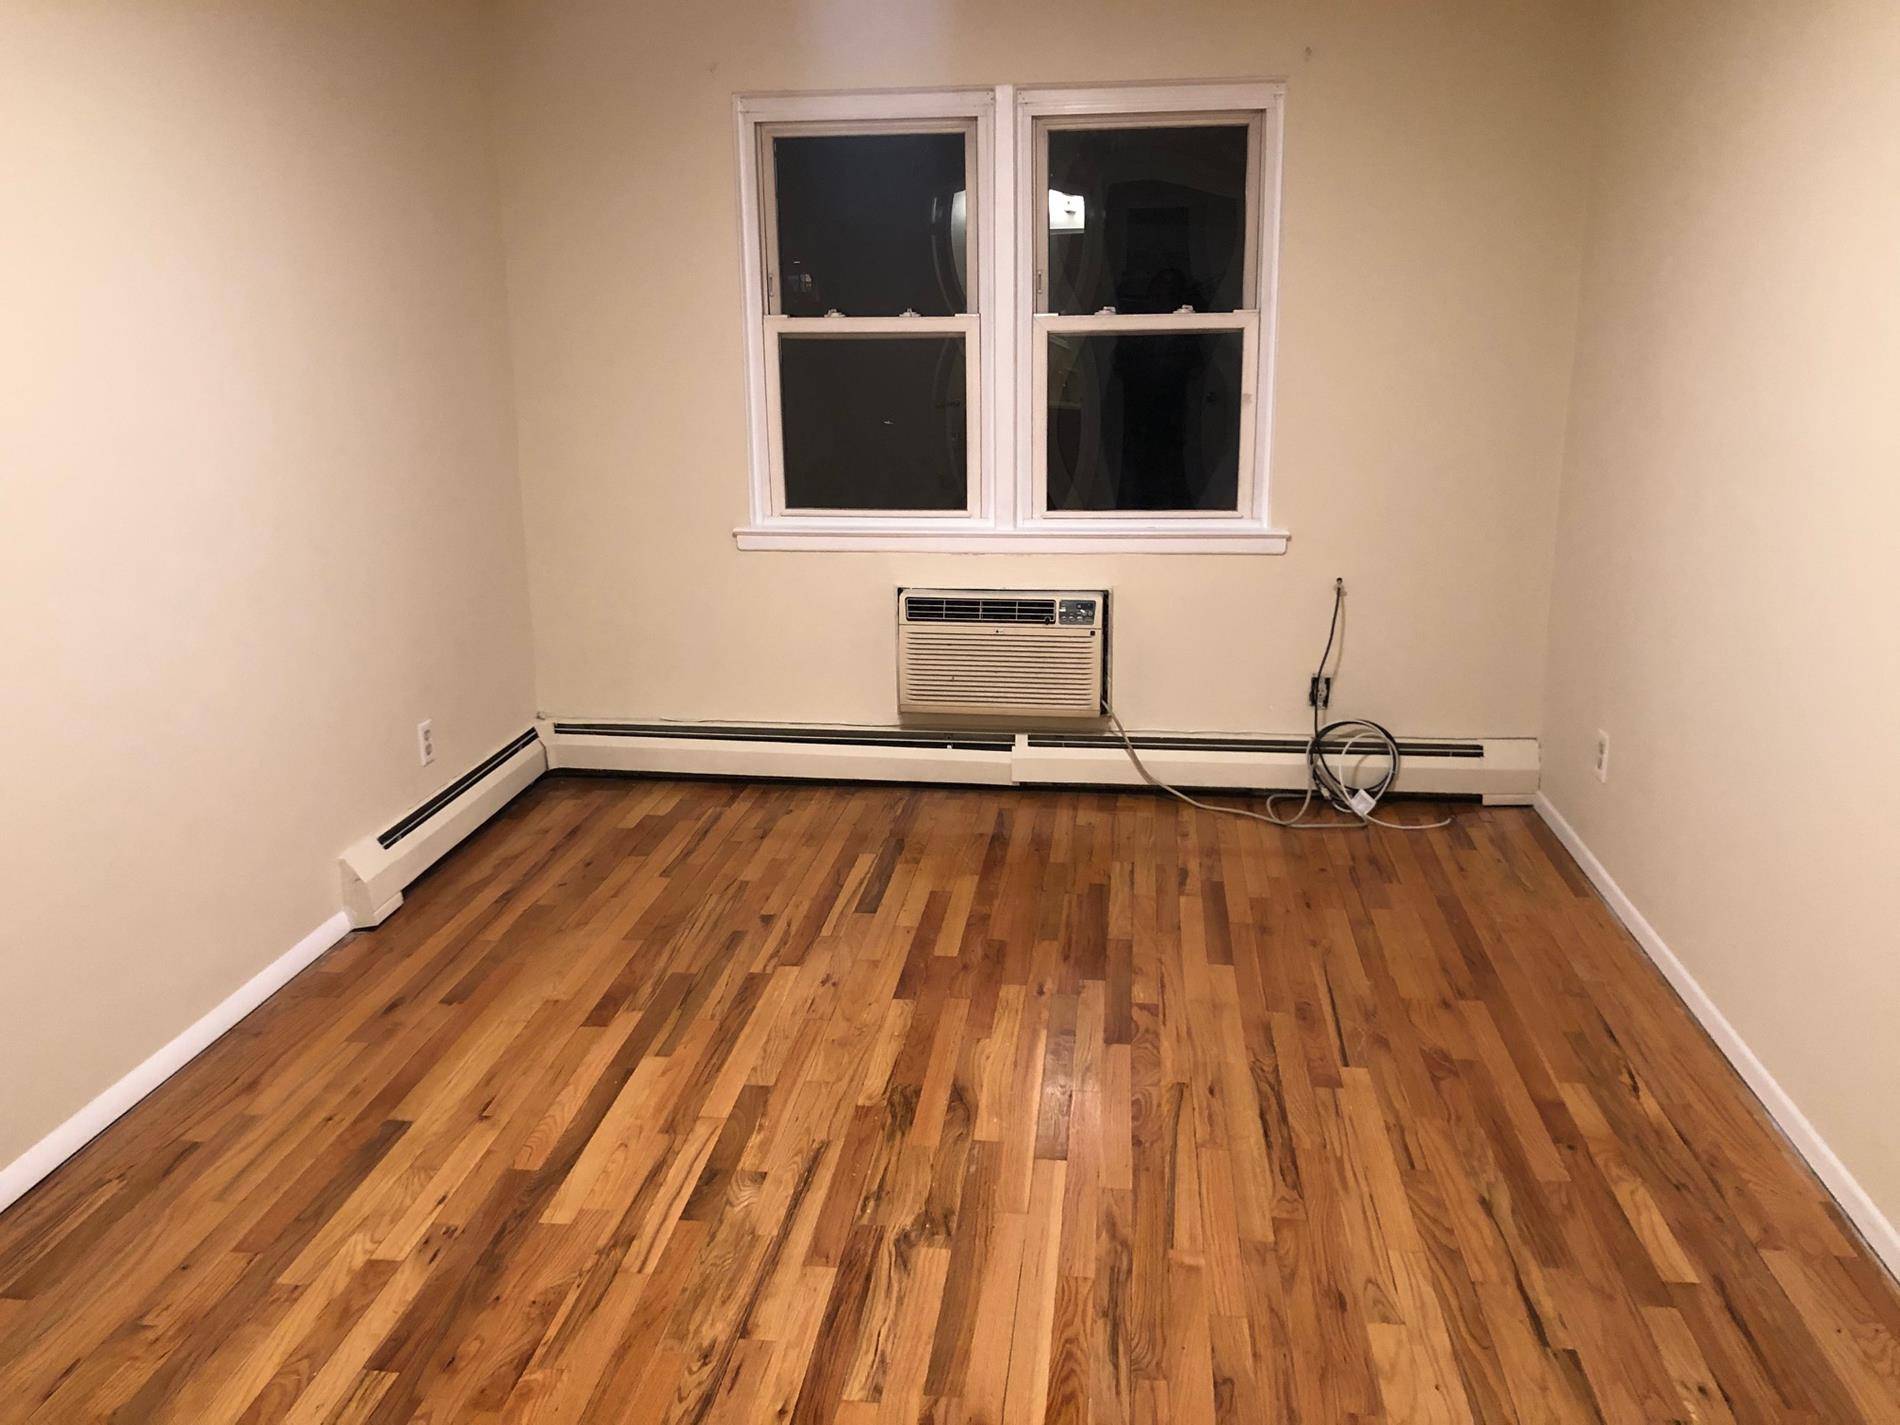 3 bedroom with plenty of closet spaceUpdated kitchen with new cabinets and dishwasher1 Full updated bathroom1 2 bathroom in master bedroomHardwood floors throughout apartment3 rd floor walk up3 in wall ...